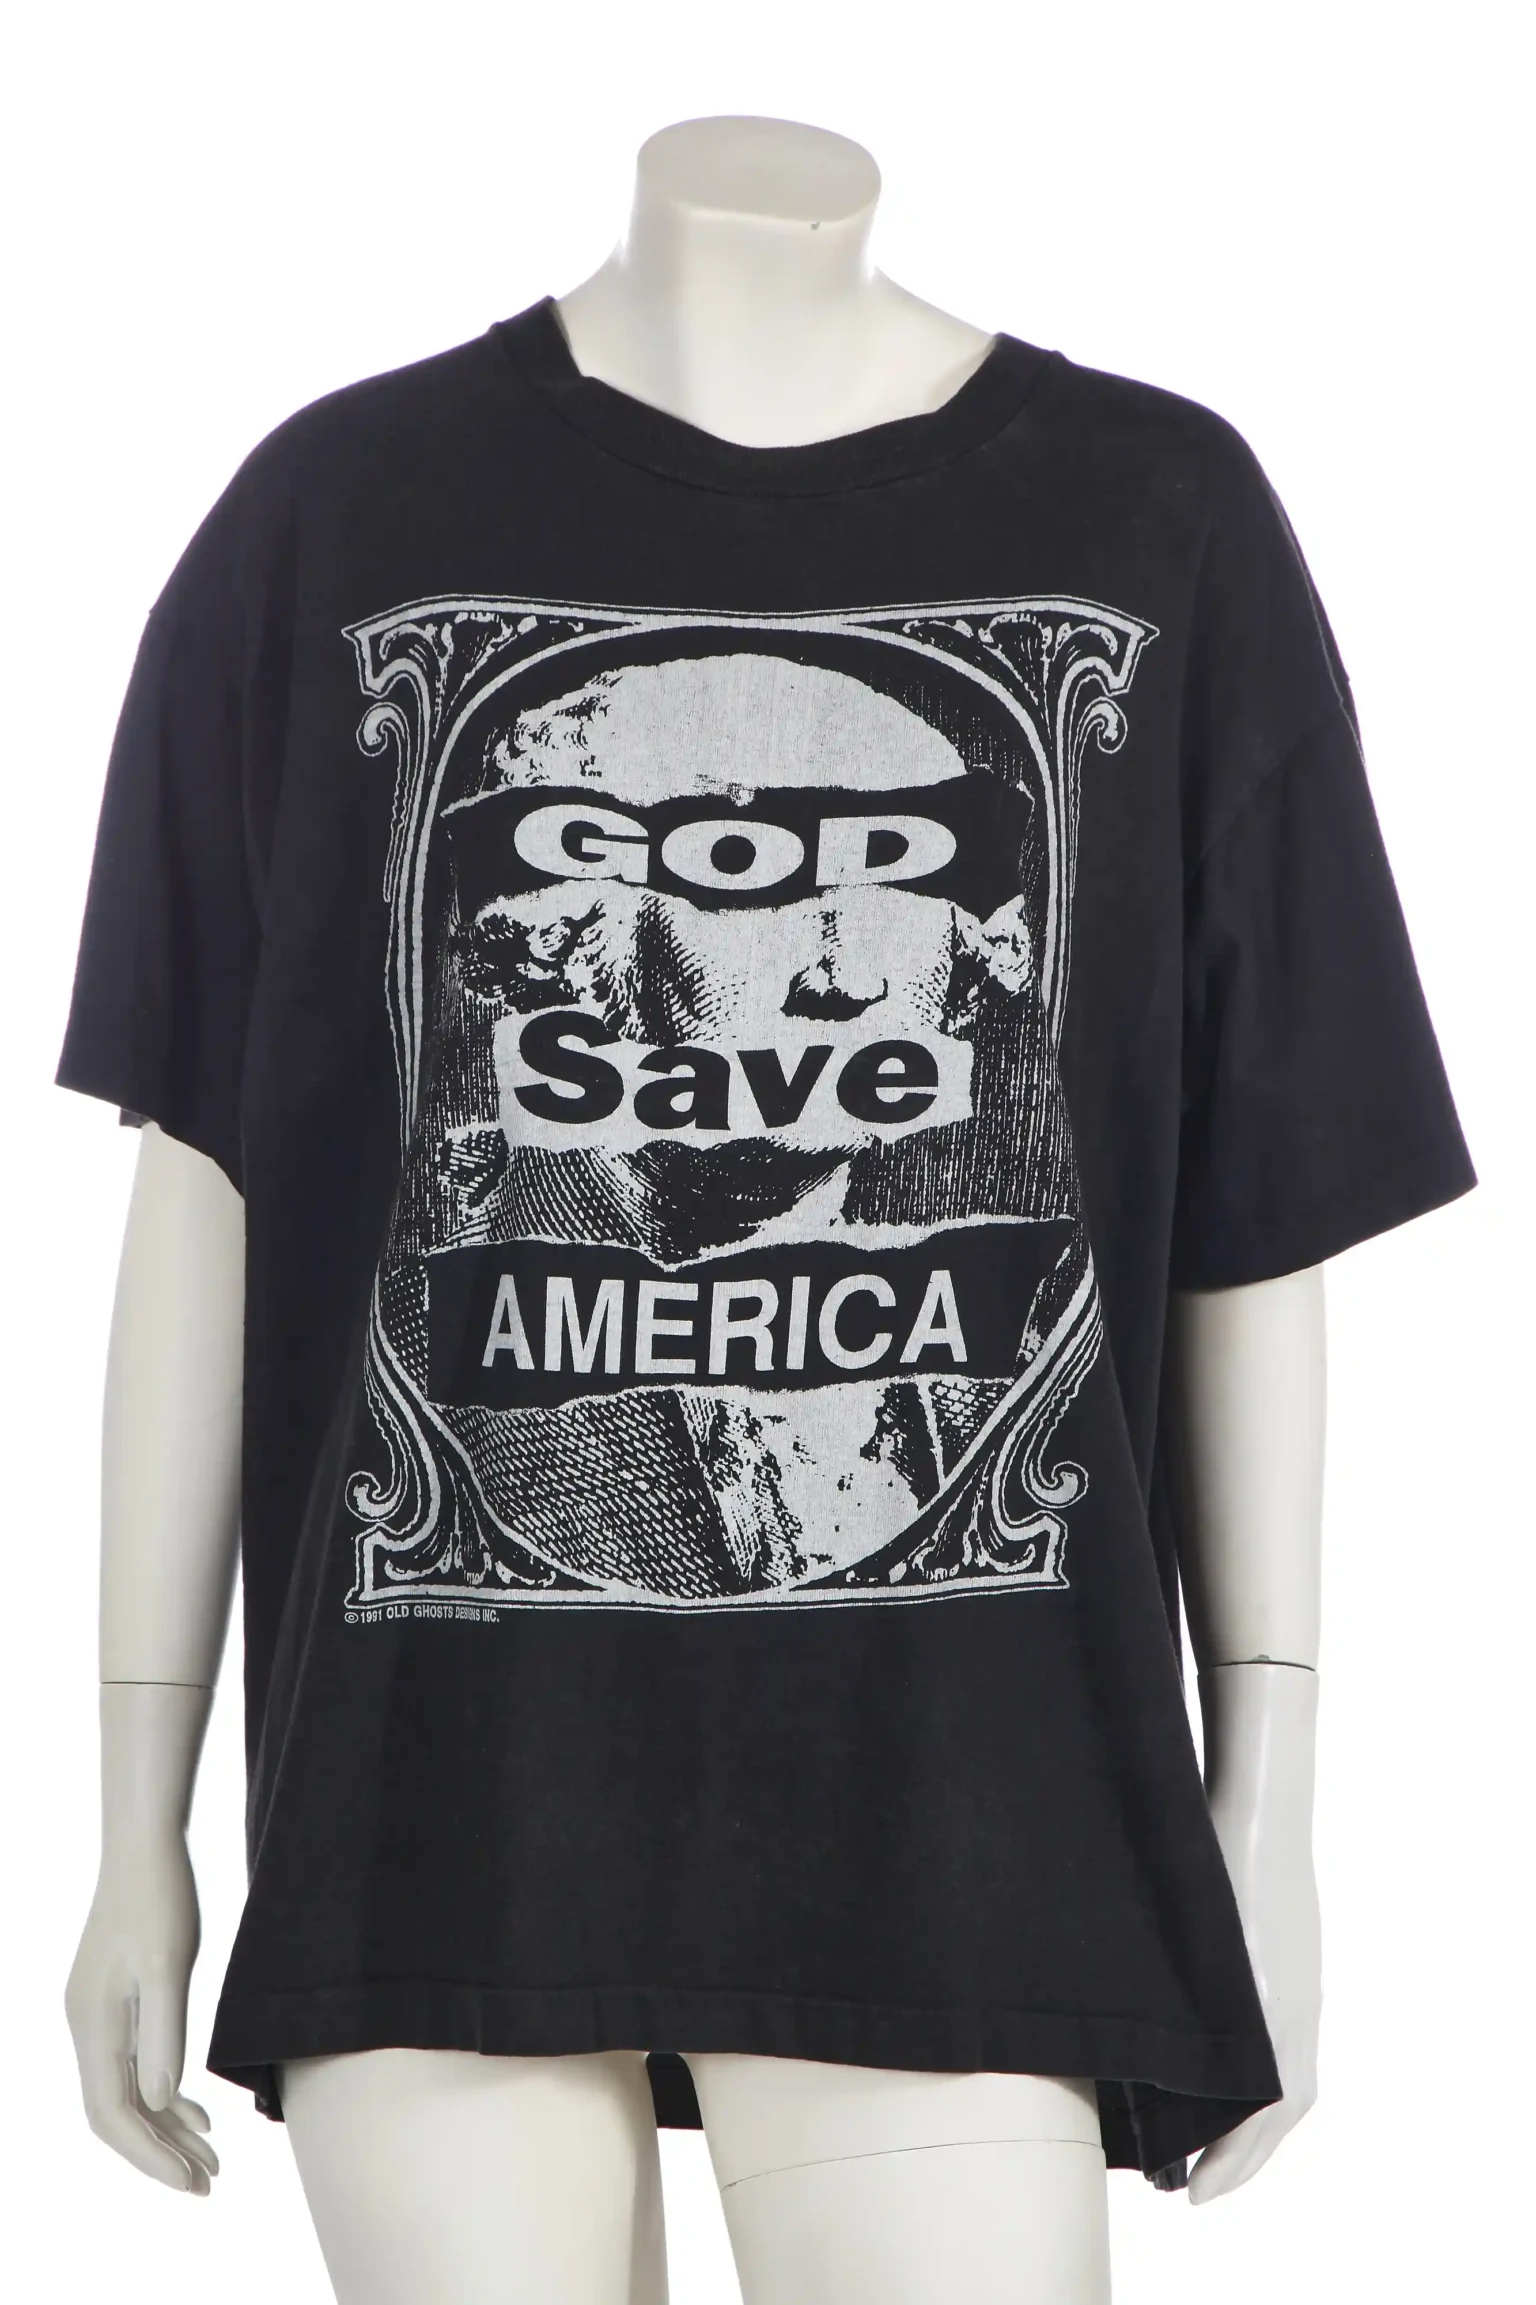 Kate Moss's £600 T-shirt, worn on an i-D magazine cover in 2004, features a print of George Washington with 'God Save America' slogan, set for auction.